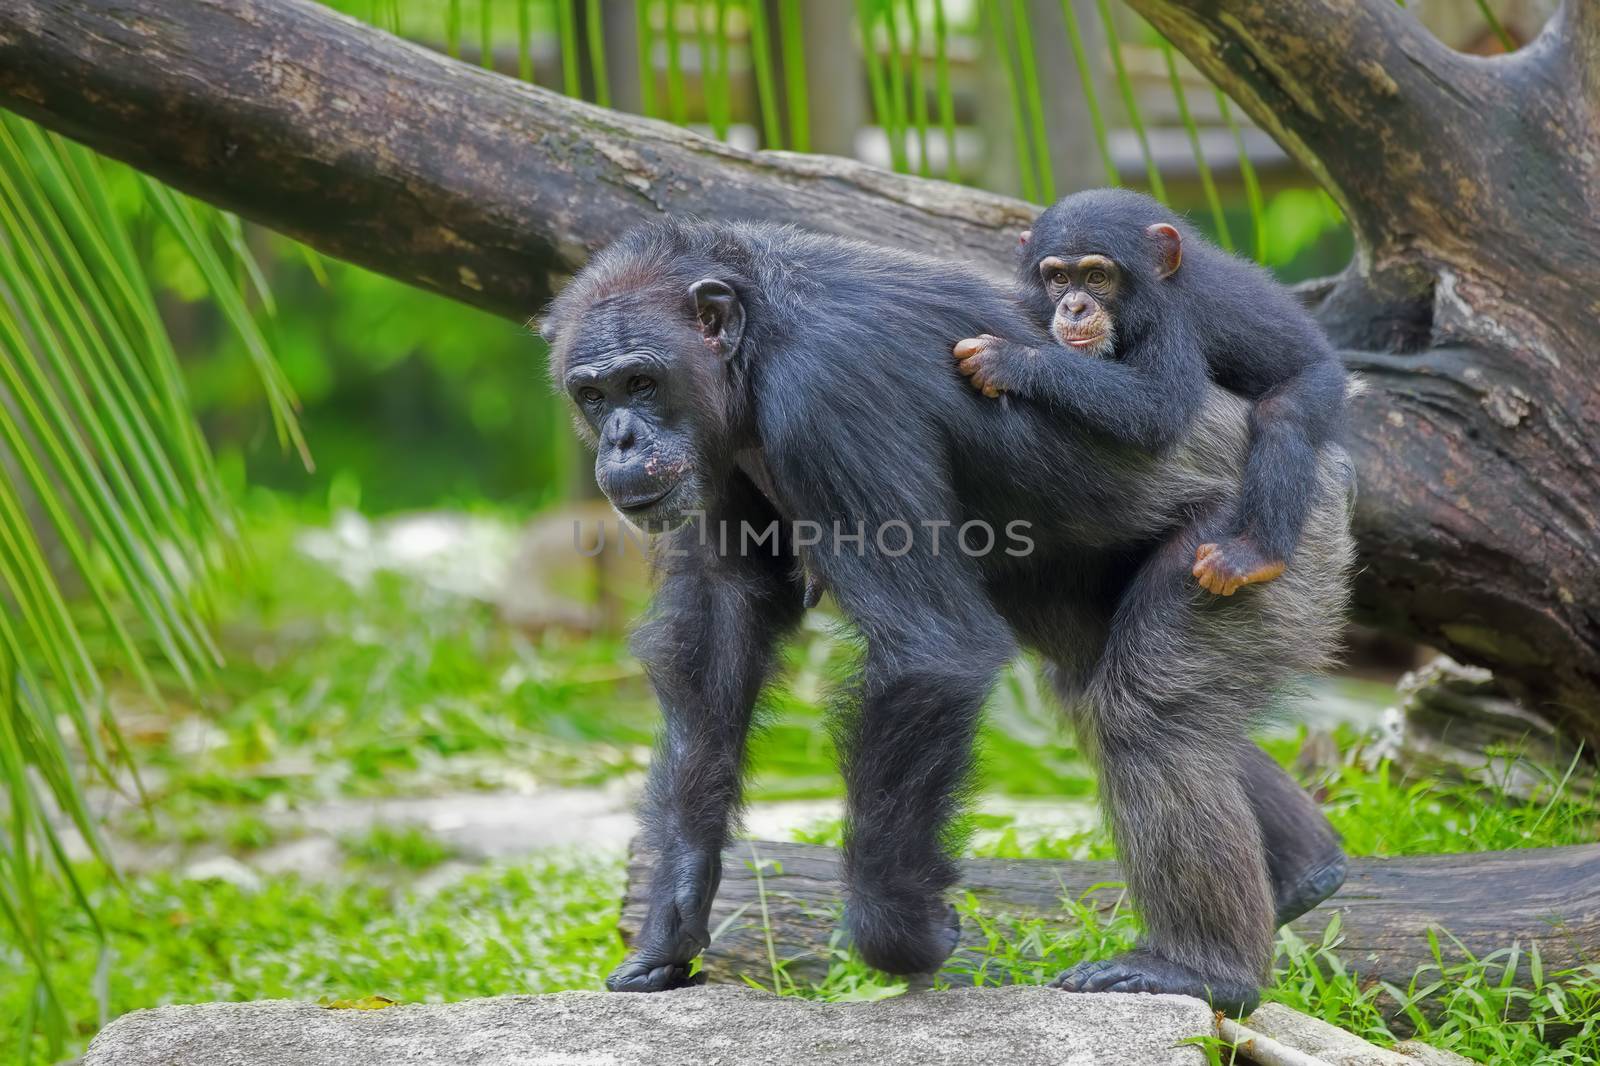 Common Chimpanzee with her child in the wild